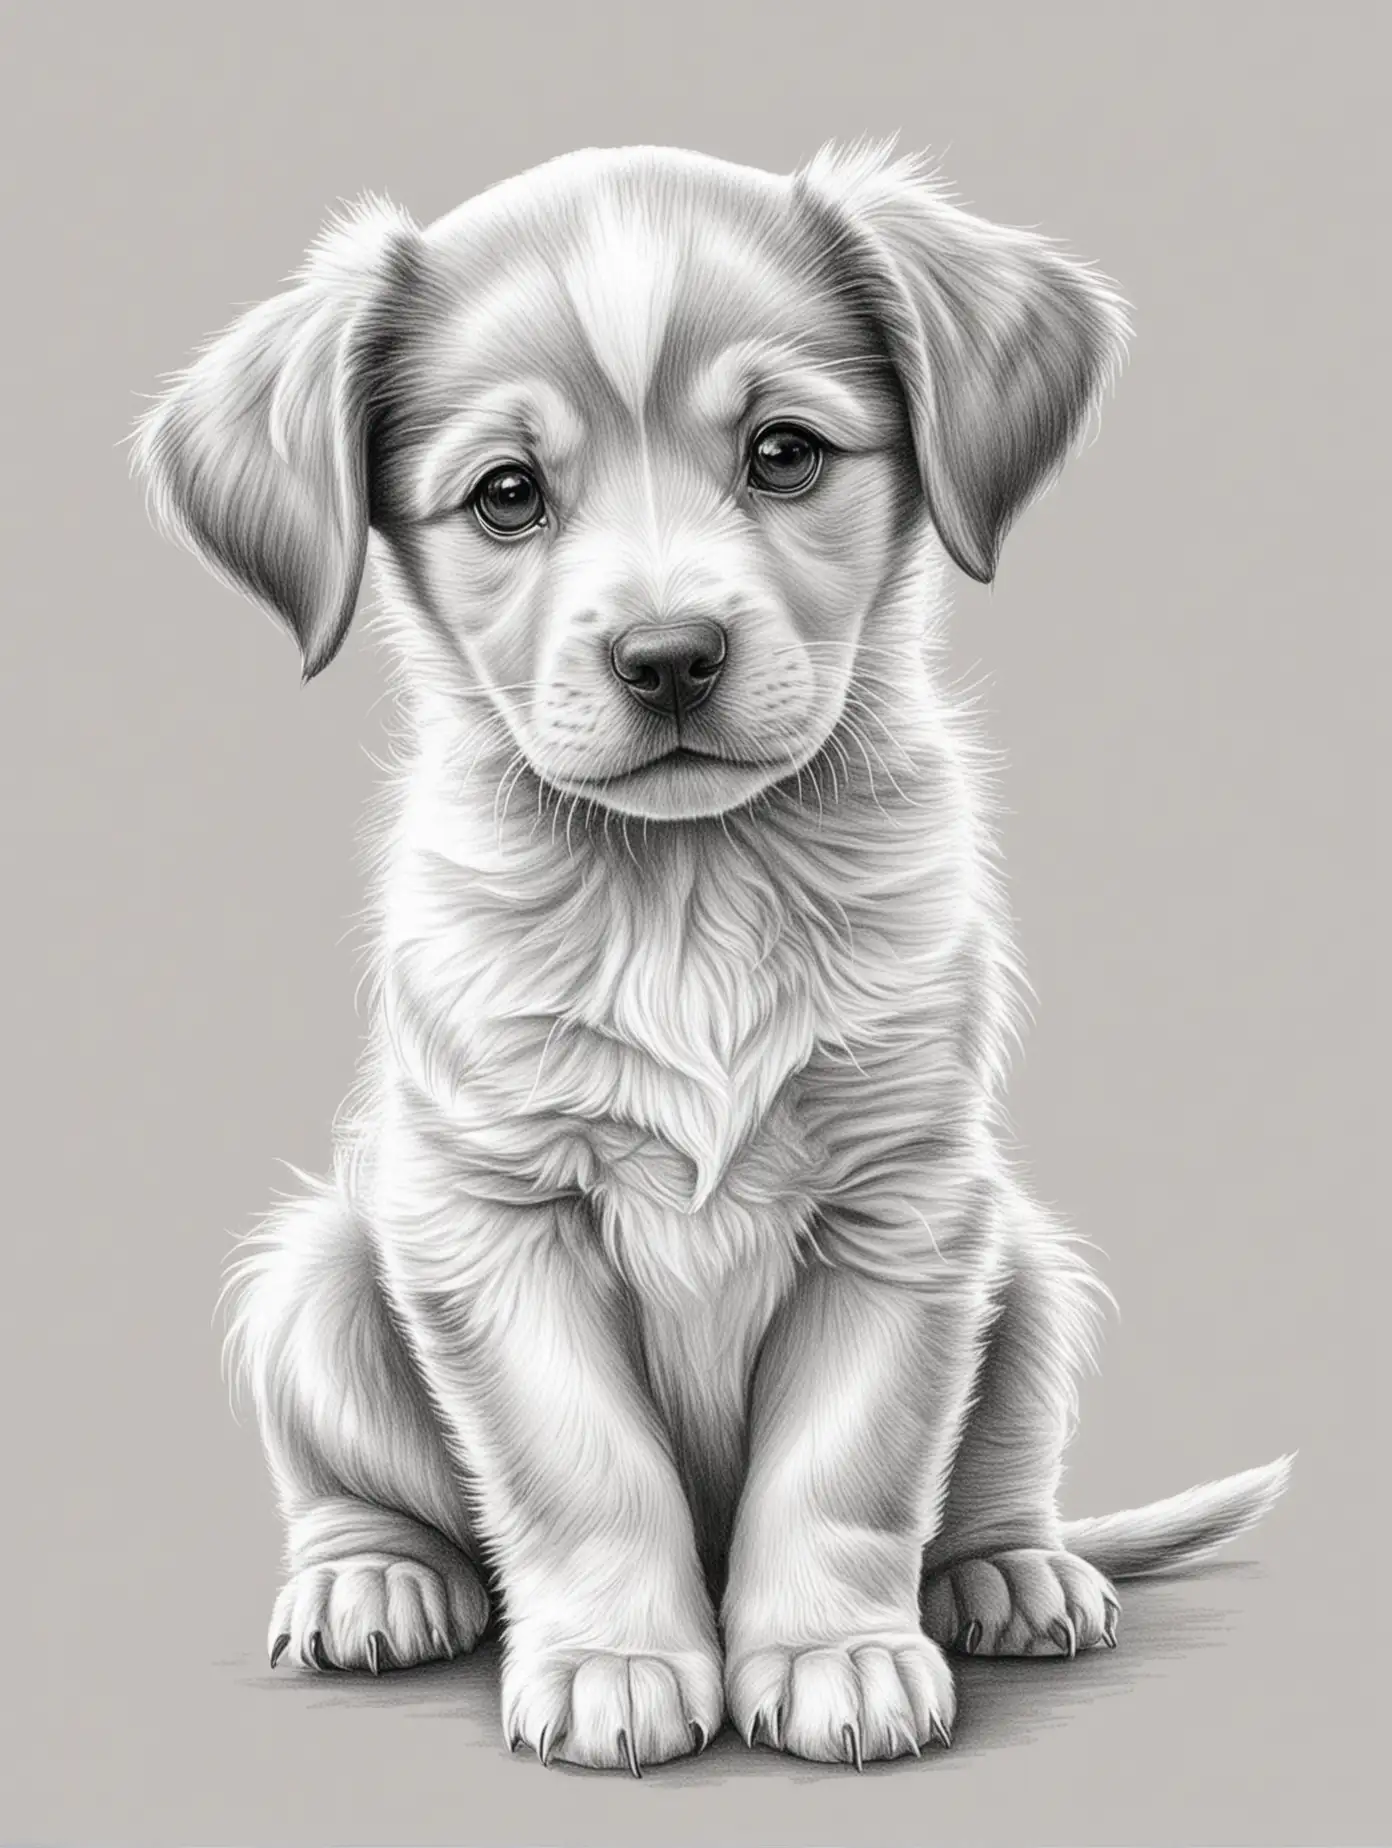 Adorable Puppy Pencil Sketch for Childrens Coloring Book